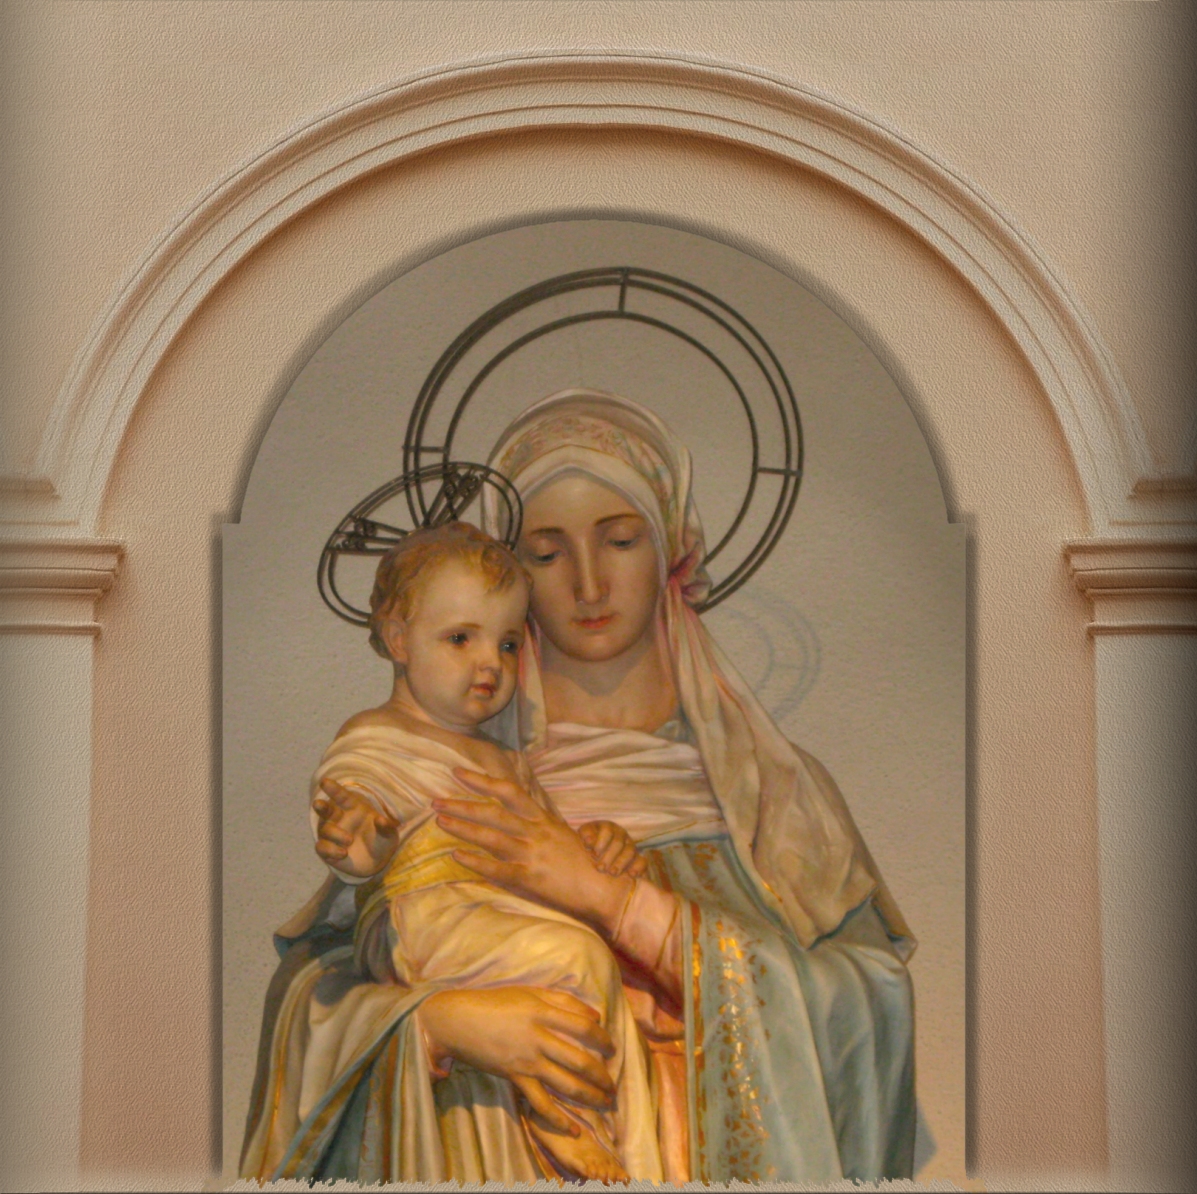 STATUE OF THE MADONNA